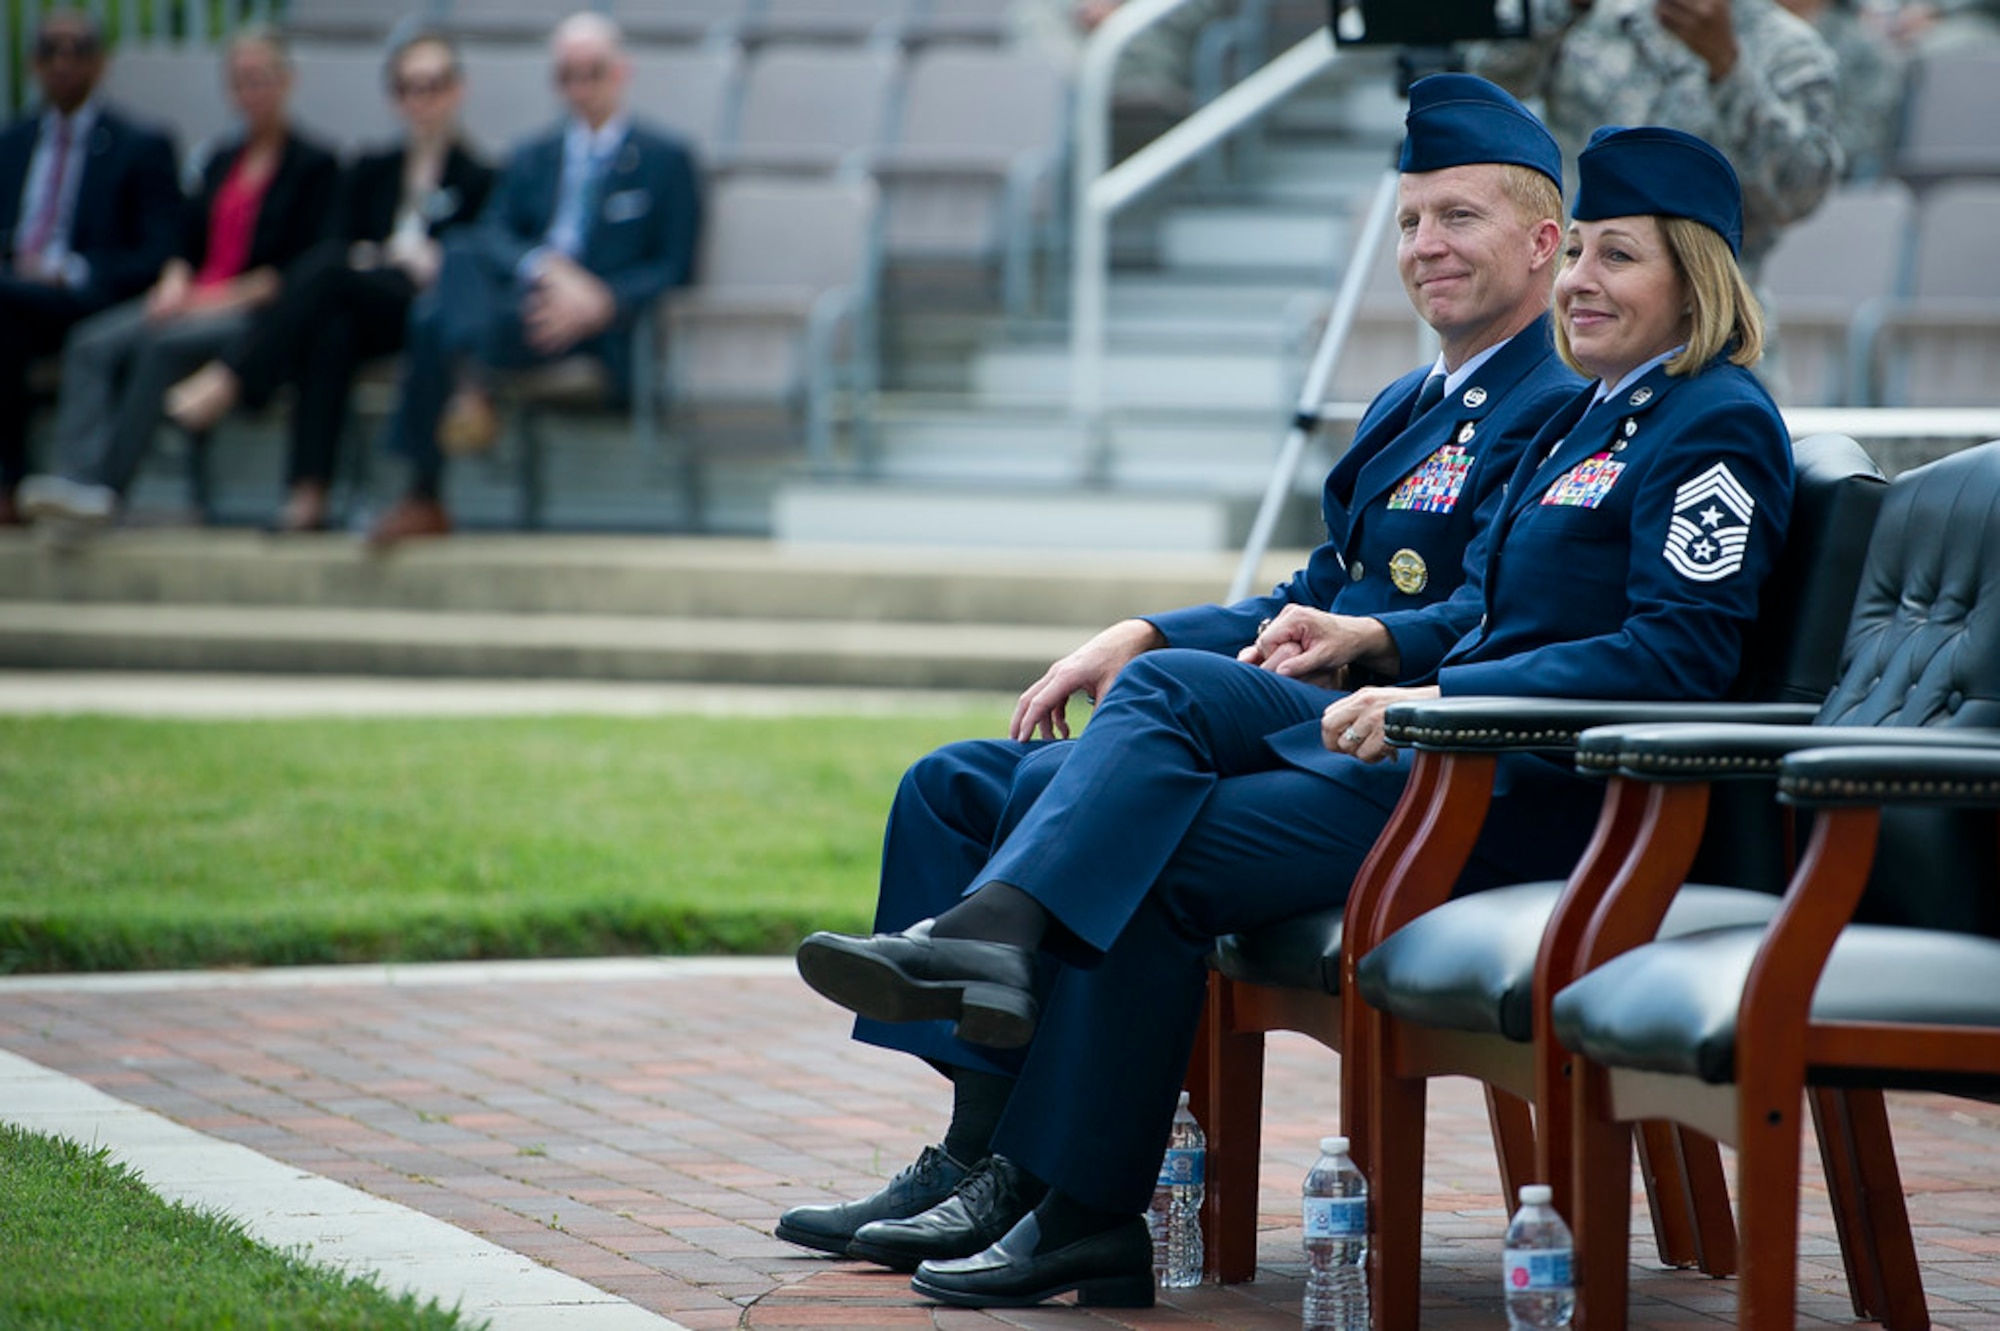 Chief Master Sgts. Melanie K. Noel, Air Force District of Washington command chief, right, and Michael D. Noel, Senior Enlisted Advisor to the Assistant to the Secretary of Defense for Public Affairs, listen to guest speakers during their combined retirement ceremony at Joint Base Anacostia-Bolling, Washington, D.C., May 31, 2019. (U.S. Air Force photo by Master Sgt. Michael B. Keller)